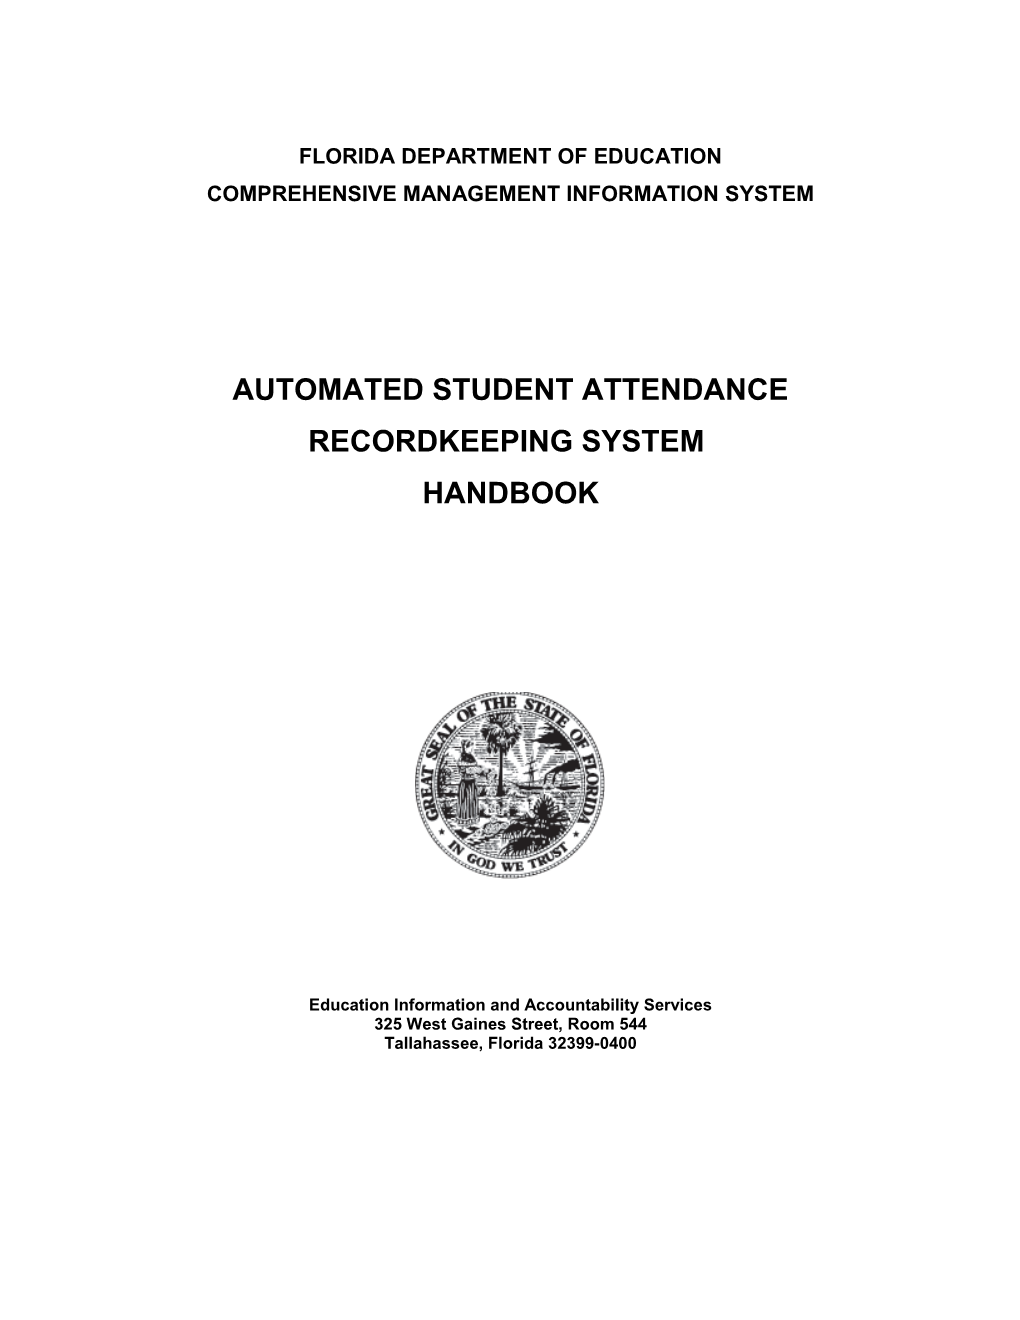 Automated Student Attendance